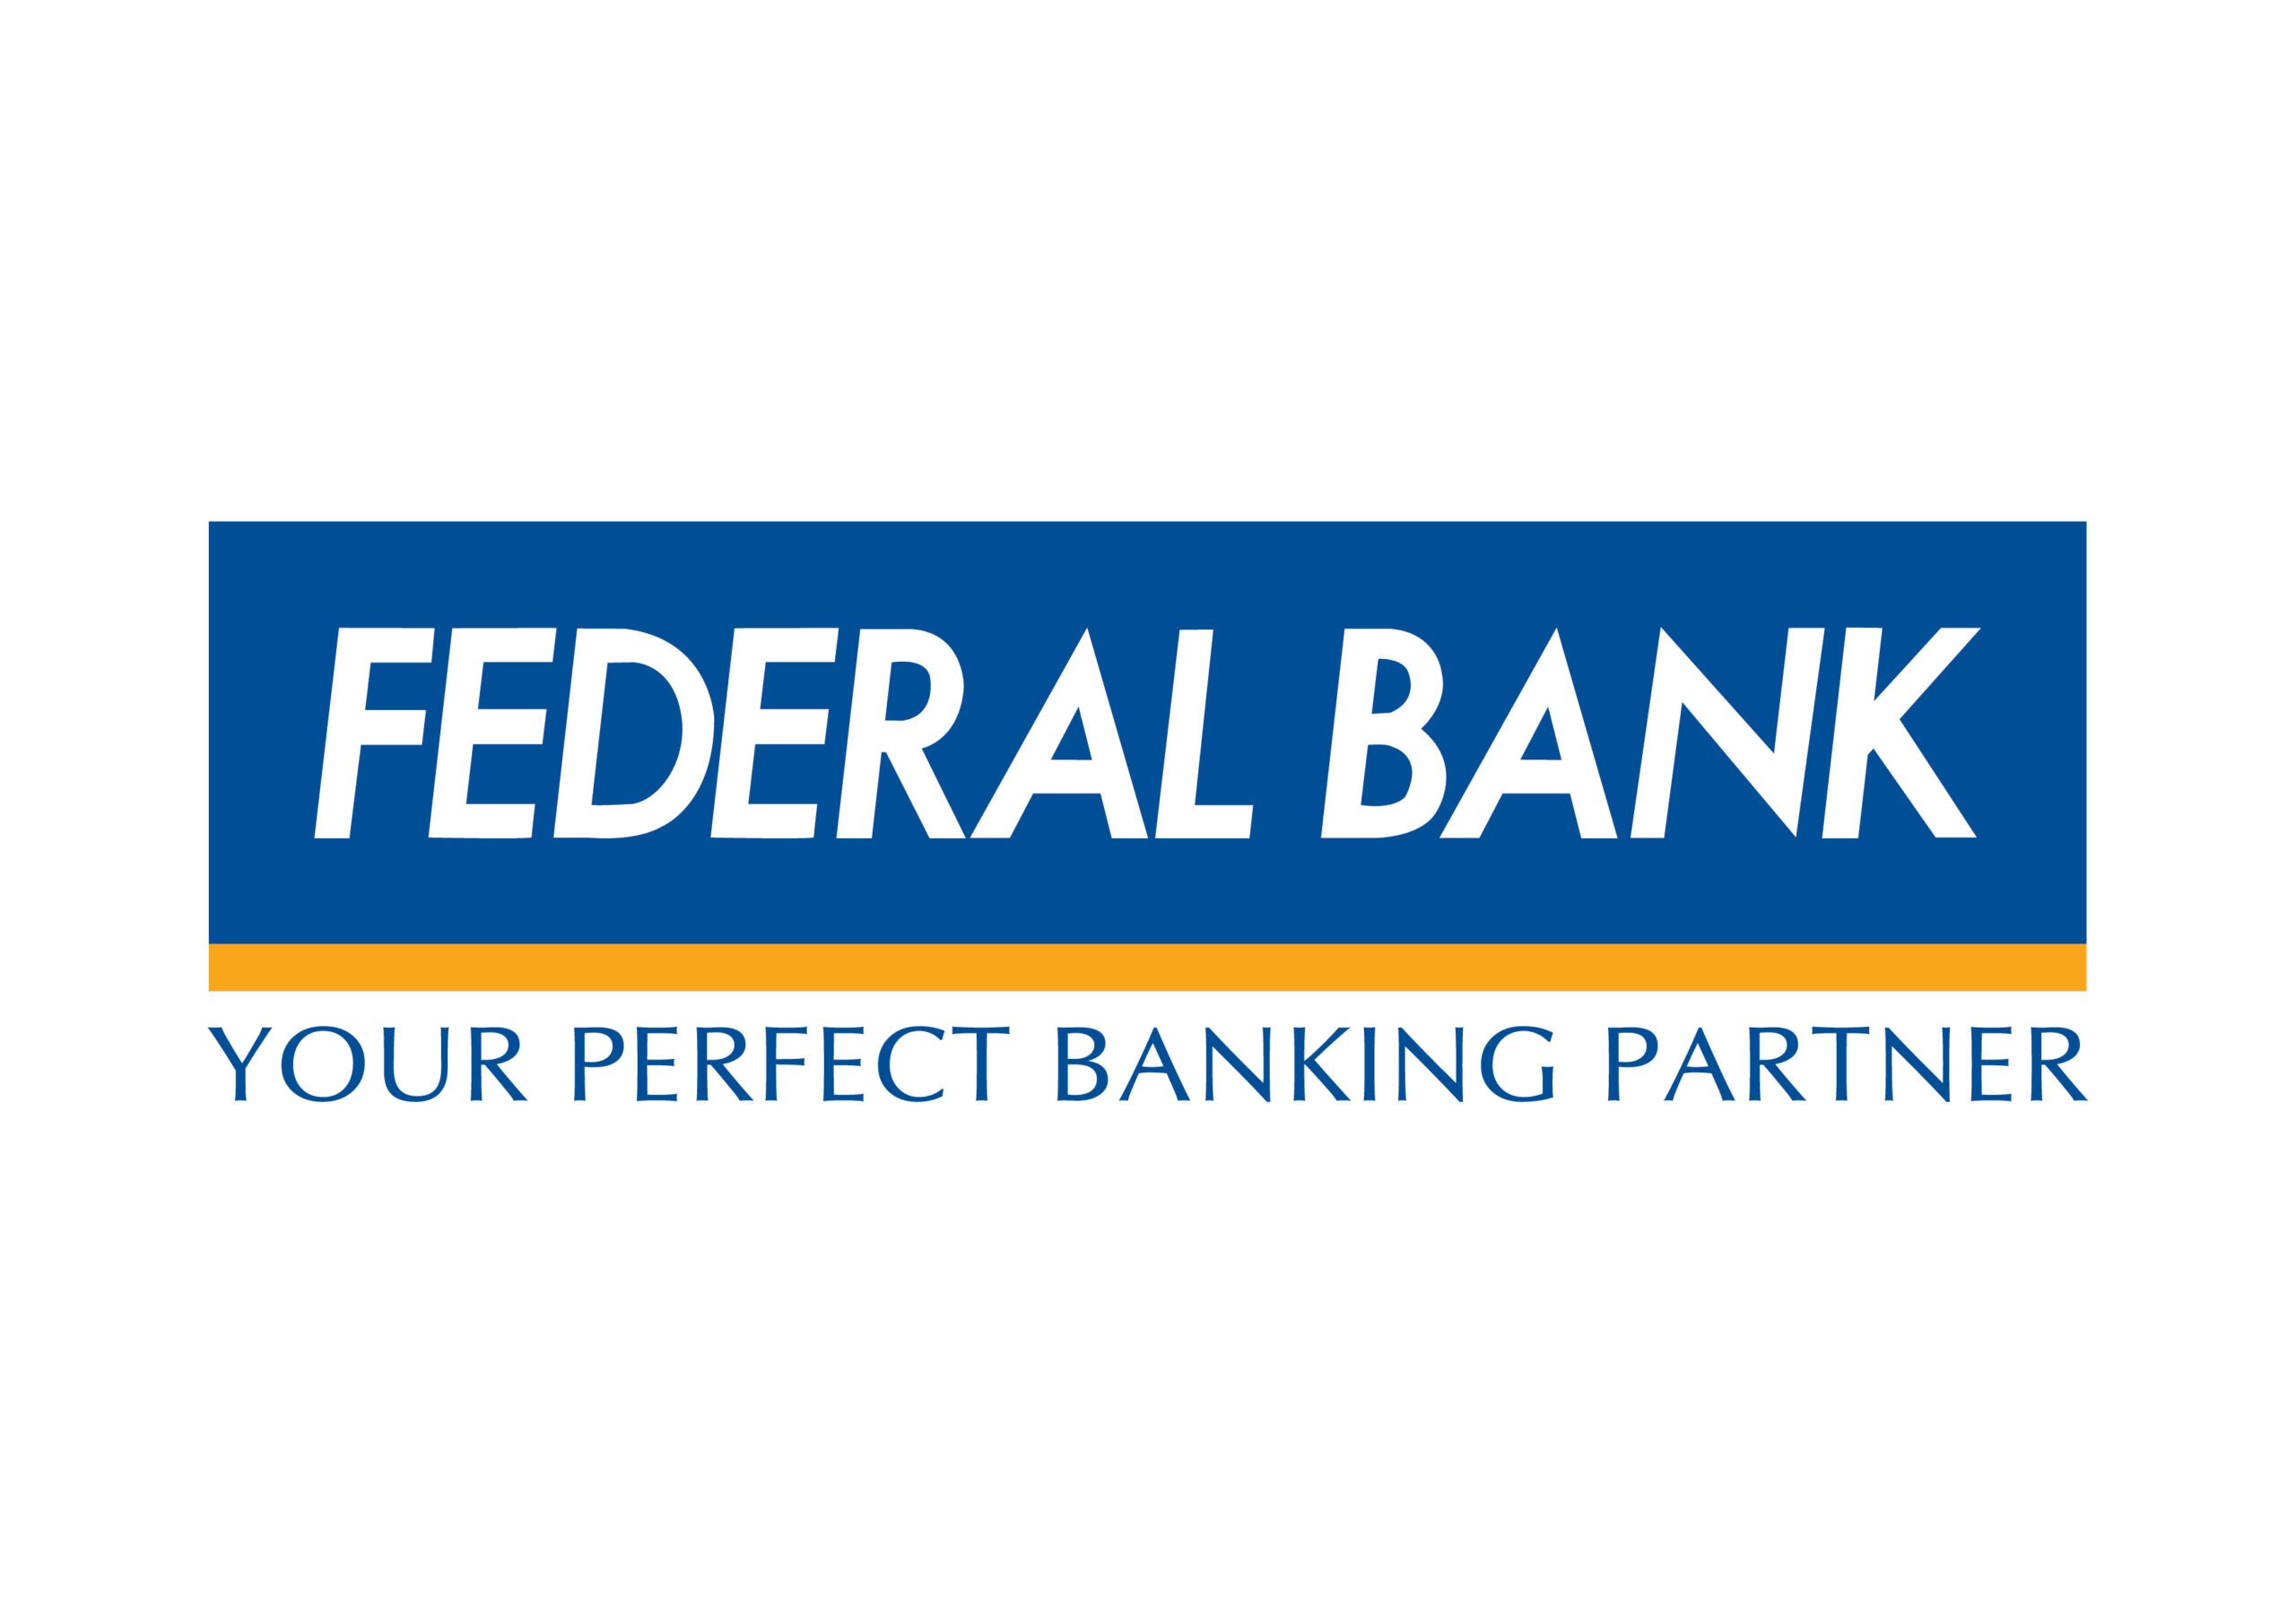 Federal Bank Q2 Results: Impressive Profit and Stable Assets